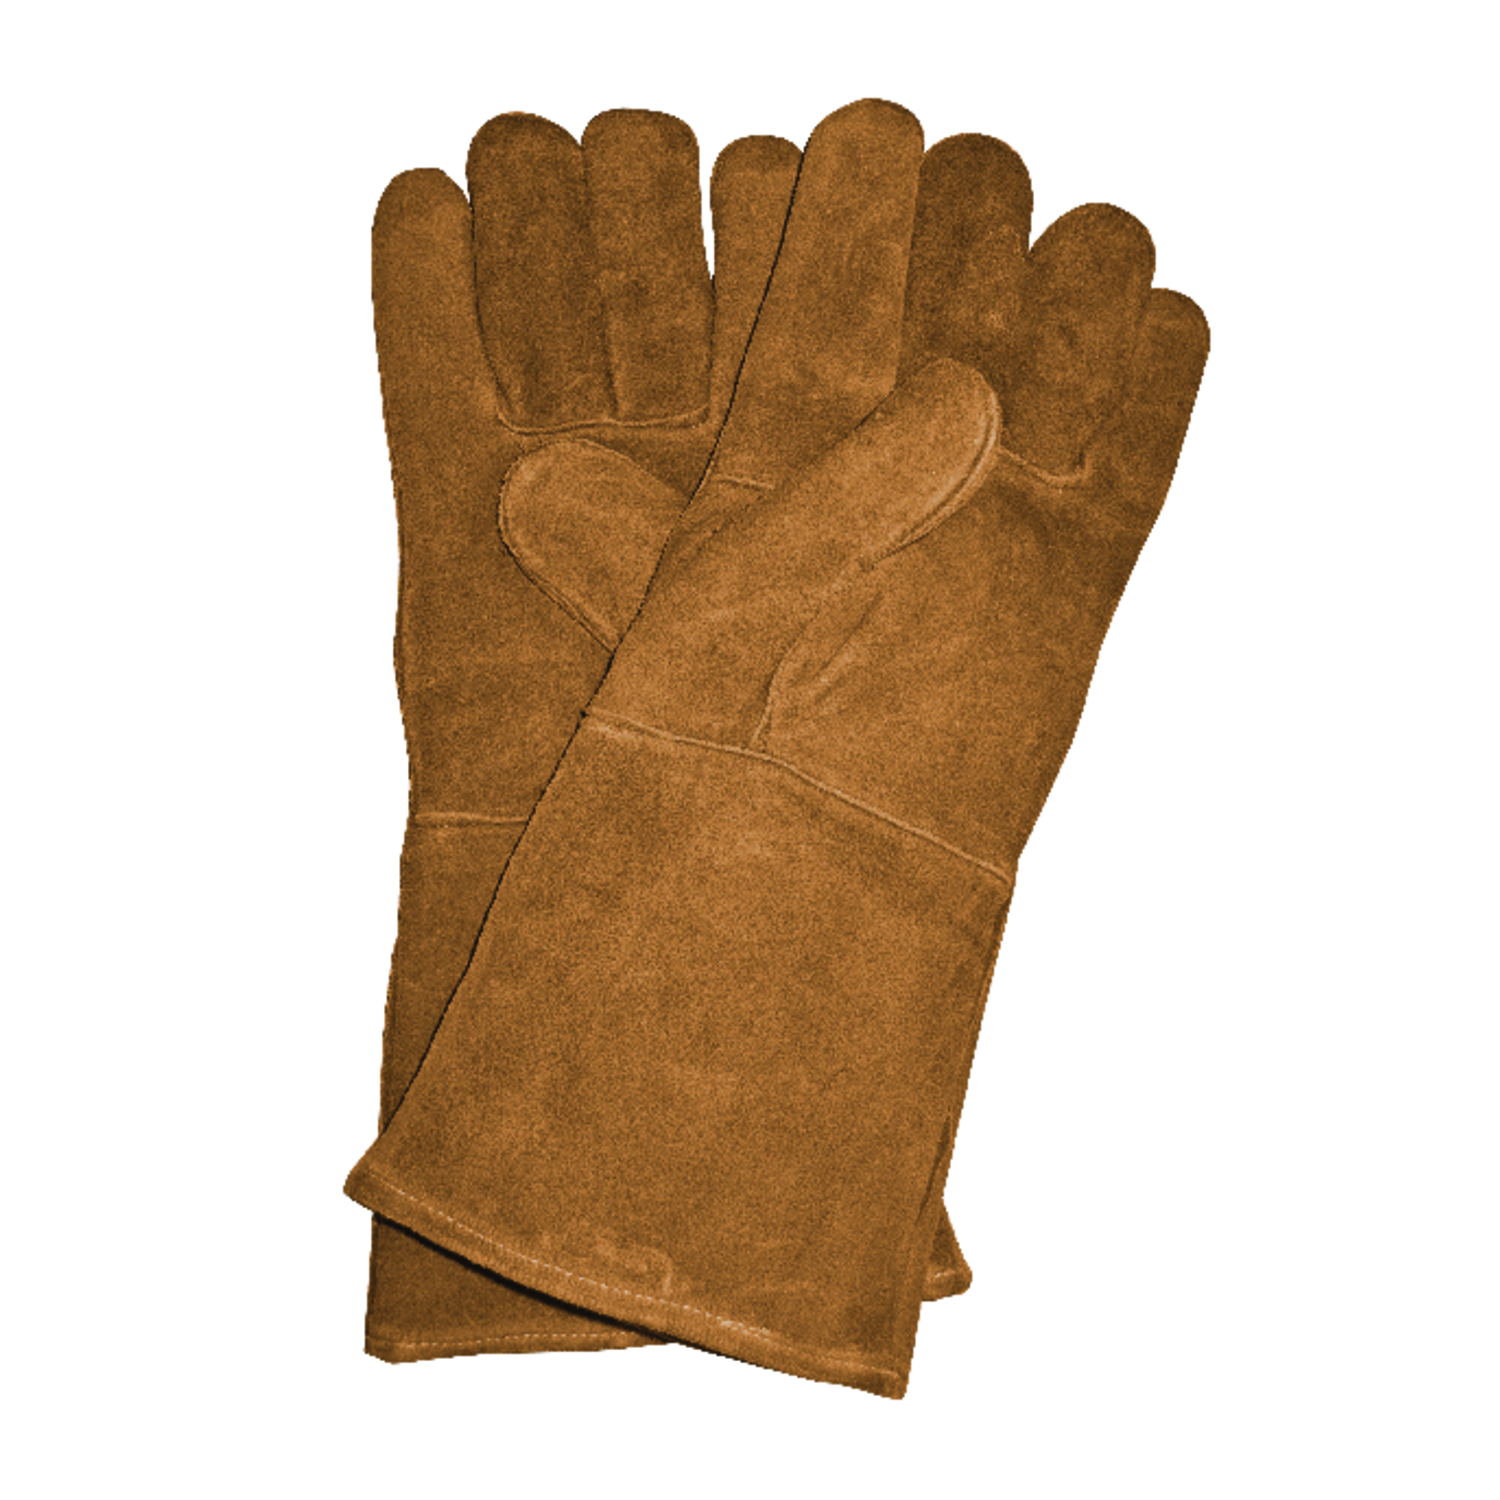 Panacea 15331 Fireplace Hearth Leather Gloves